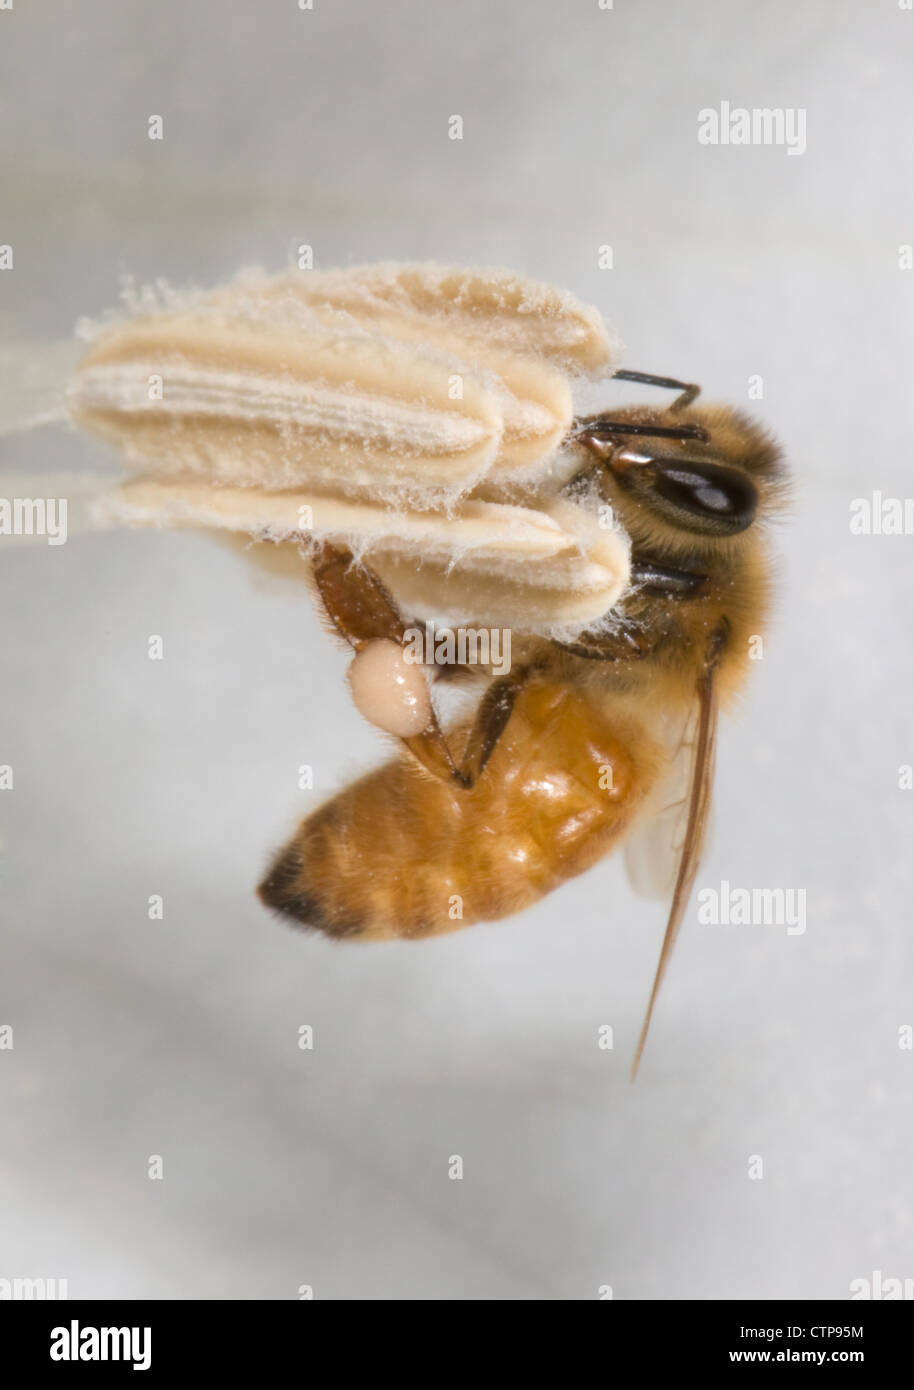 honey bee foraging and collecting pollen in a Datura flower Stock Photo